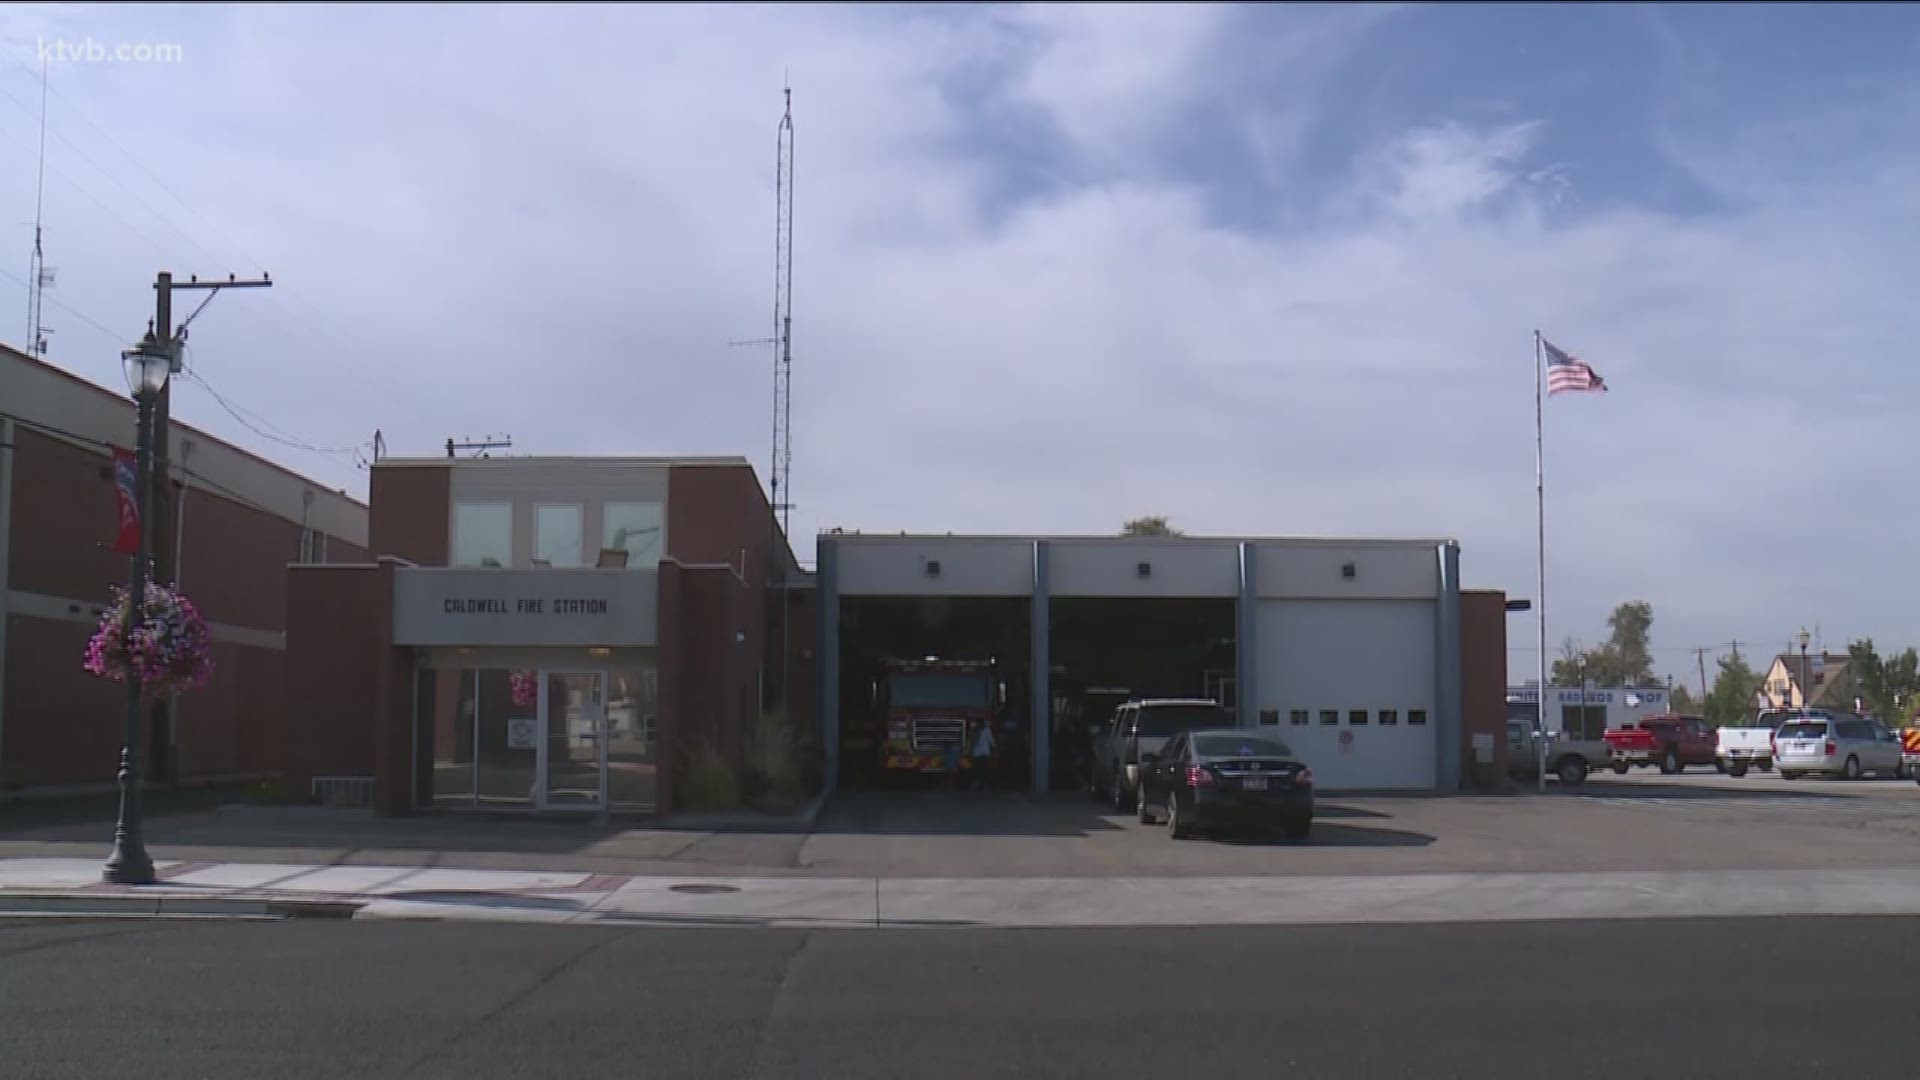 Growth in Canyon County is booming, according to county commissioners. 

With more growth, the need for things like bigger infrastructure and increased emergency services also grows. The changes to infrastructure come with a price tag and to try and help curb some of those costs, so Canyon County commissioners are considering putting impact fees in place to pay for the projects.